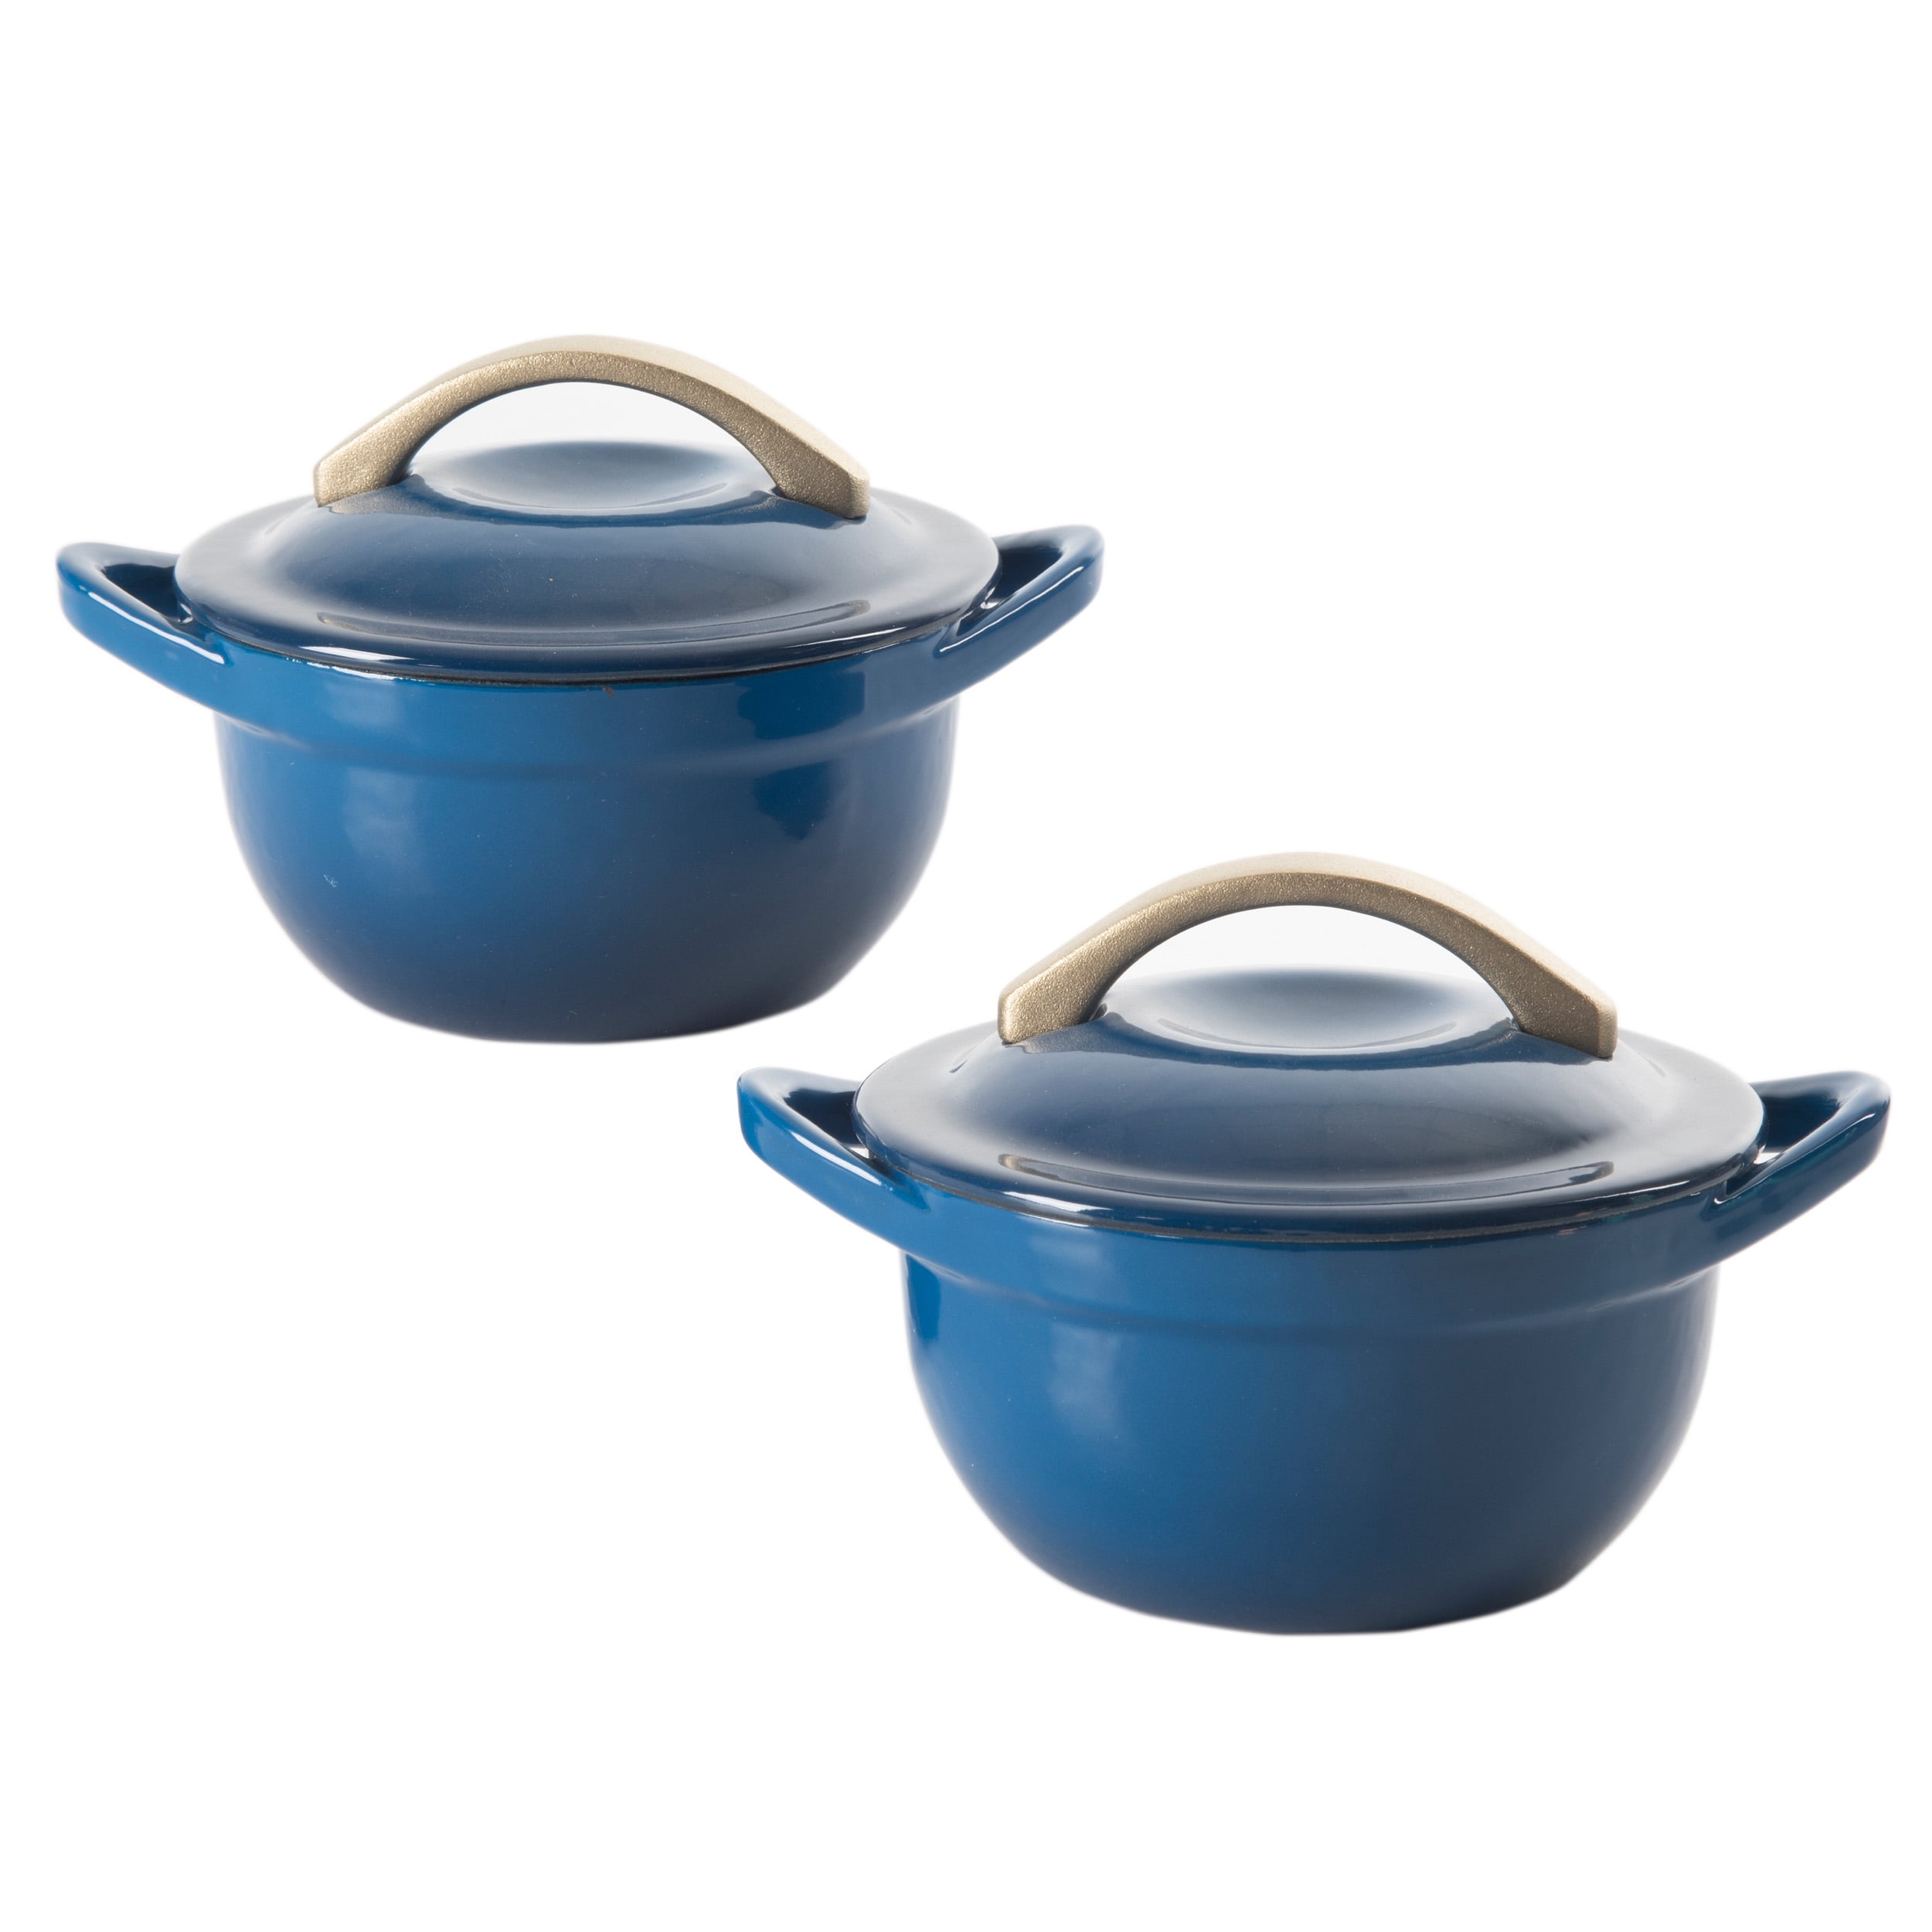  Flavehc Mini Dutch Oven 0.25 qt., 8 oz Mini Cocotte Set of 4,  Small Blue Enameled Cast Iron Pot With Lid and Handels, Cast Iron Garlic  Roaster for Oven: Home & Kitchen